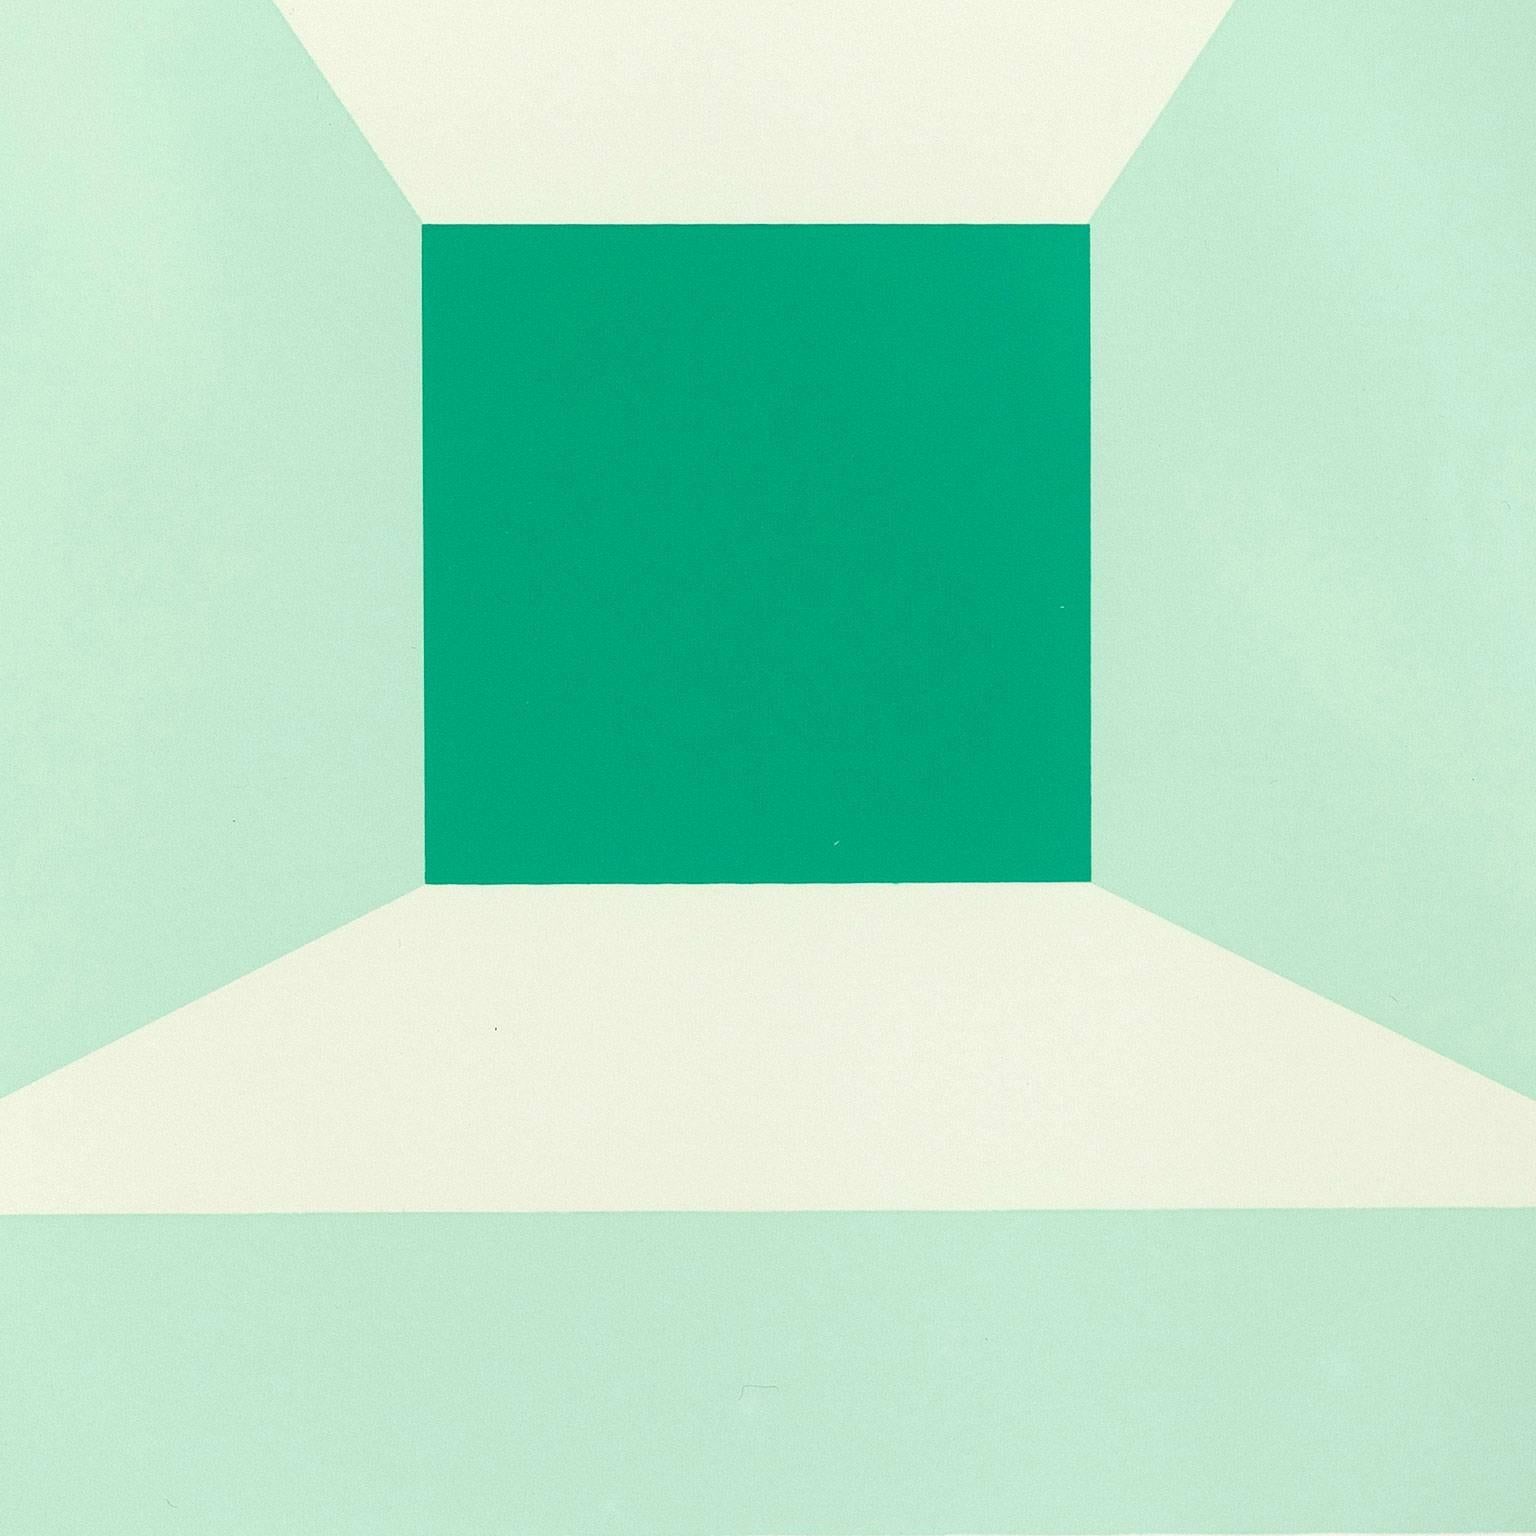 Mitered Squares - Miami Green - Abstract Geometric Print by Josef Albers